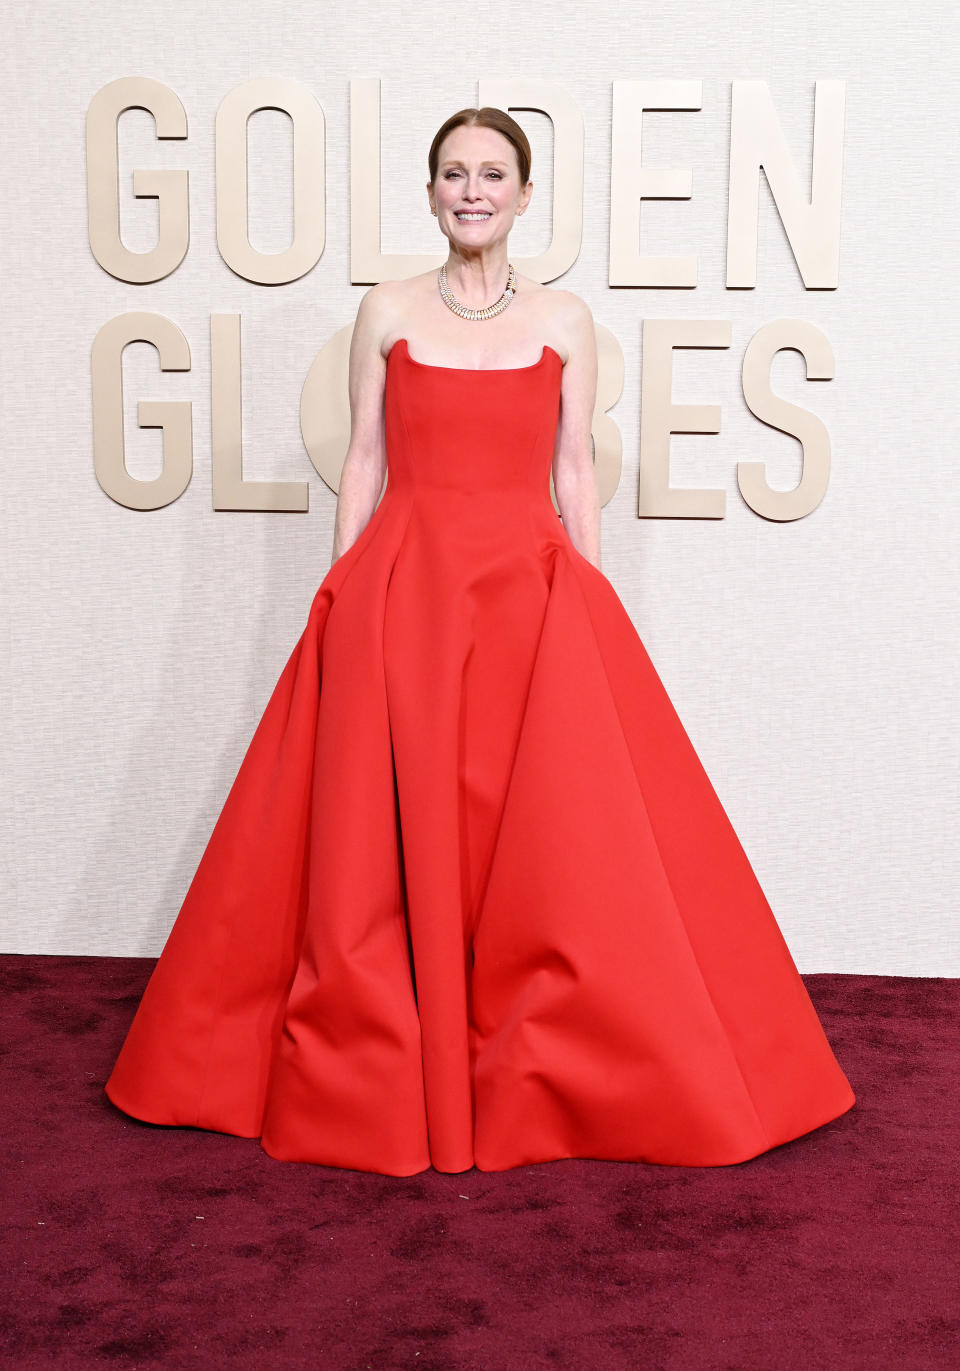 Julianne Moore at the 81st Golden Globe Awards held at the Beverly Hilton Hotel on January 7, 2024 in Beverly Hills, California. (Photo by Gilbert Flores/Golden Globes 2024/Golden Globes 2024 via Getty Images)